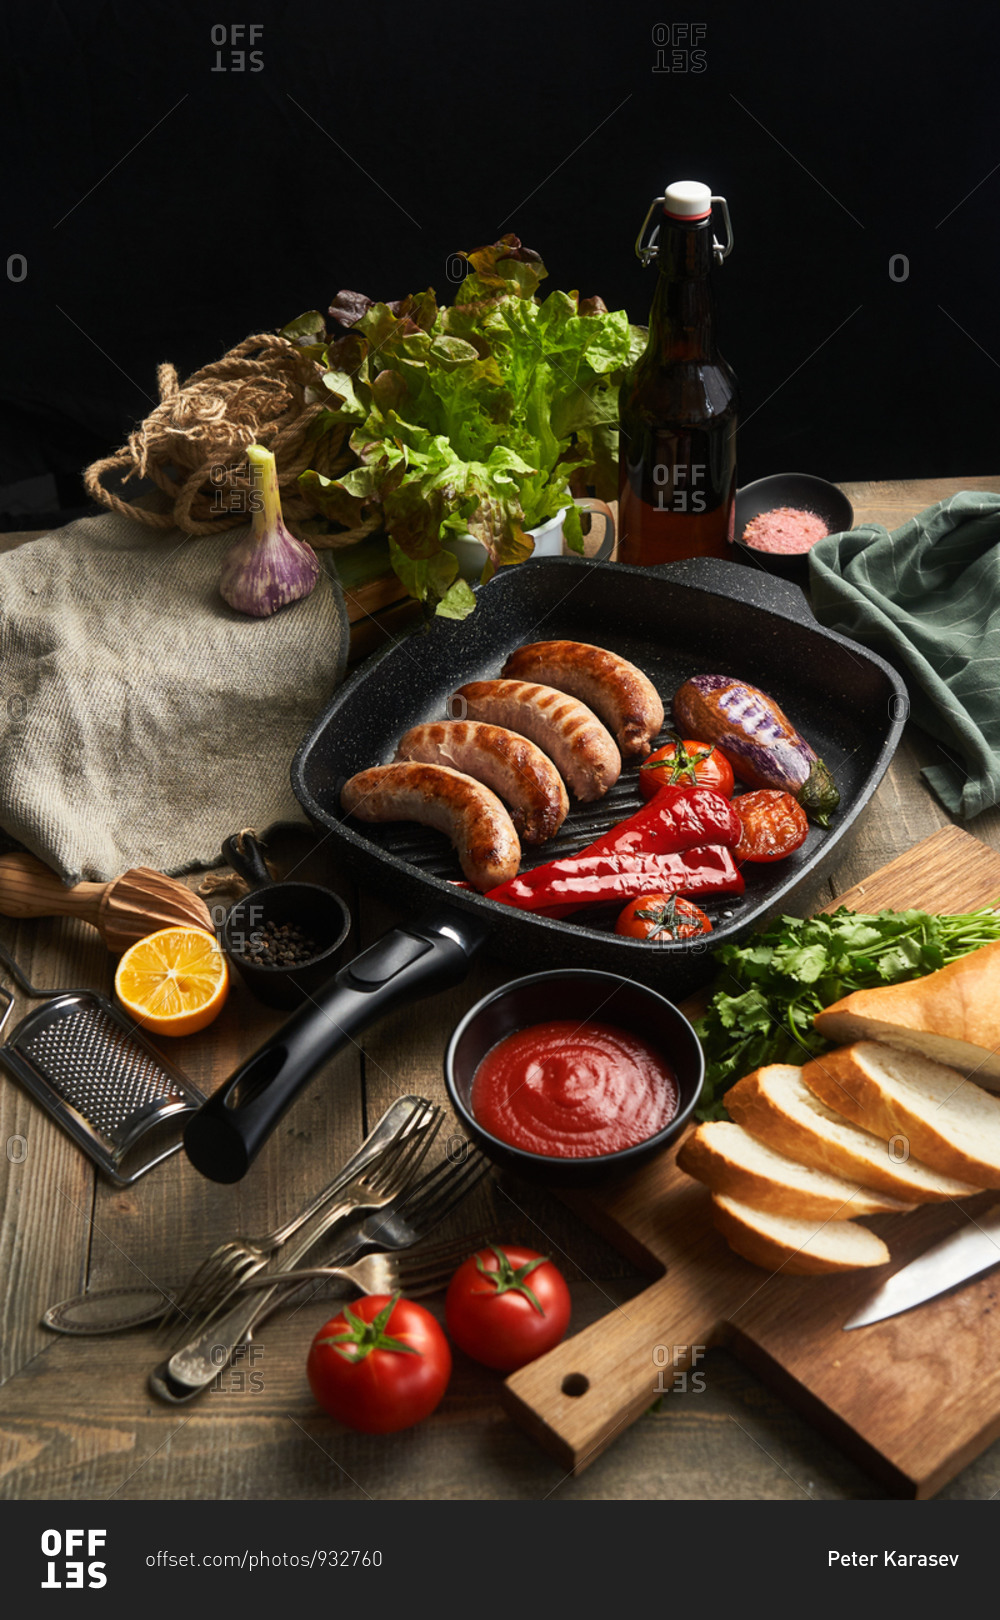 Sausage and fresh veggies in a skillet on rustic table